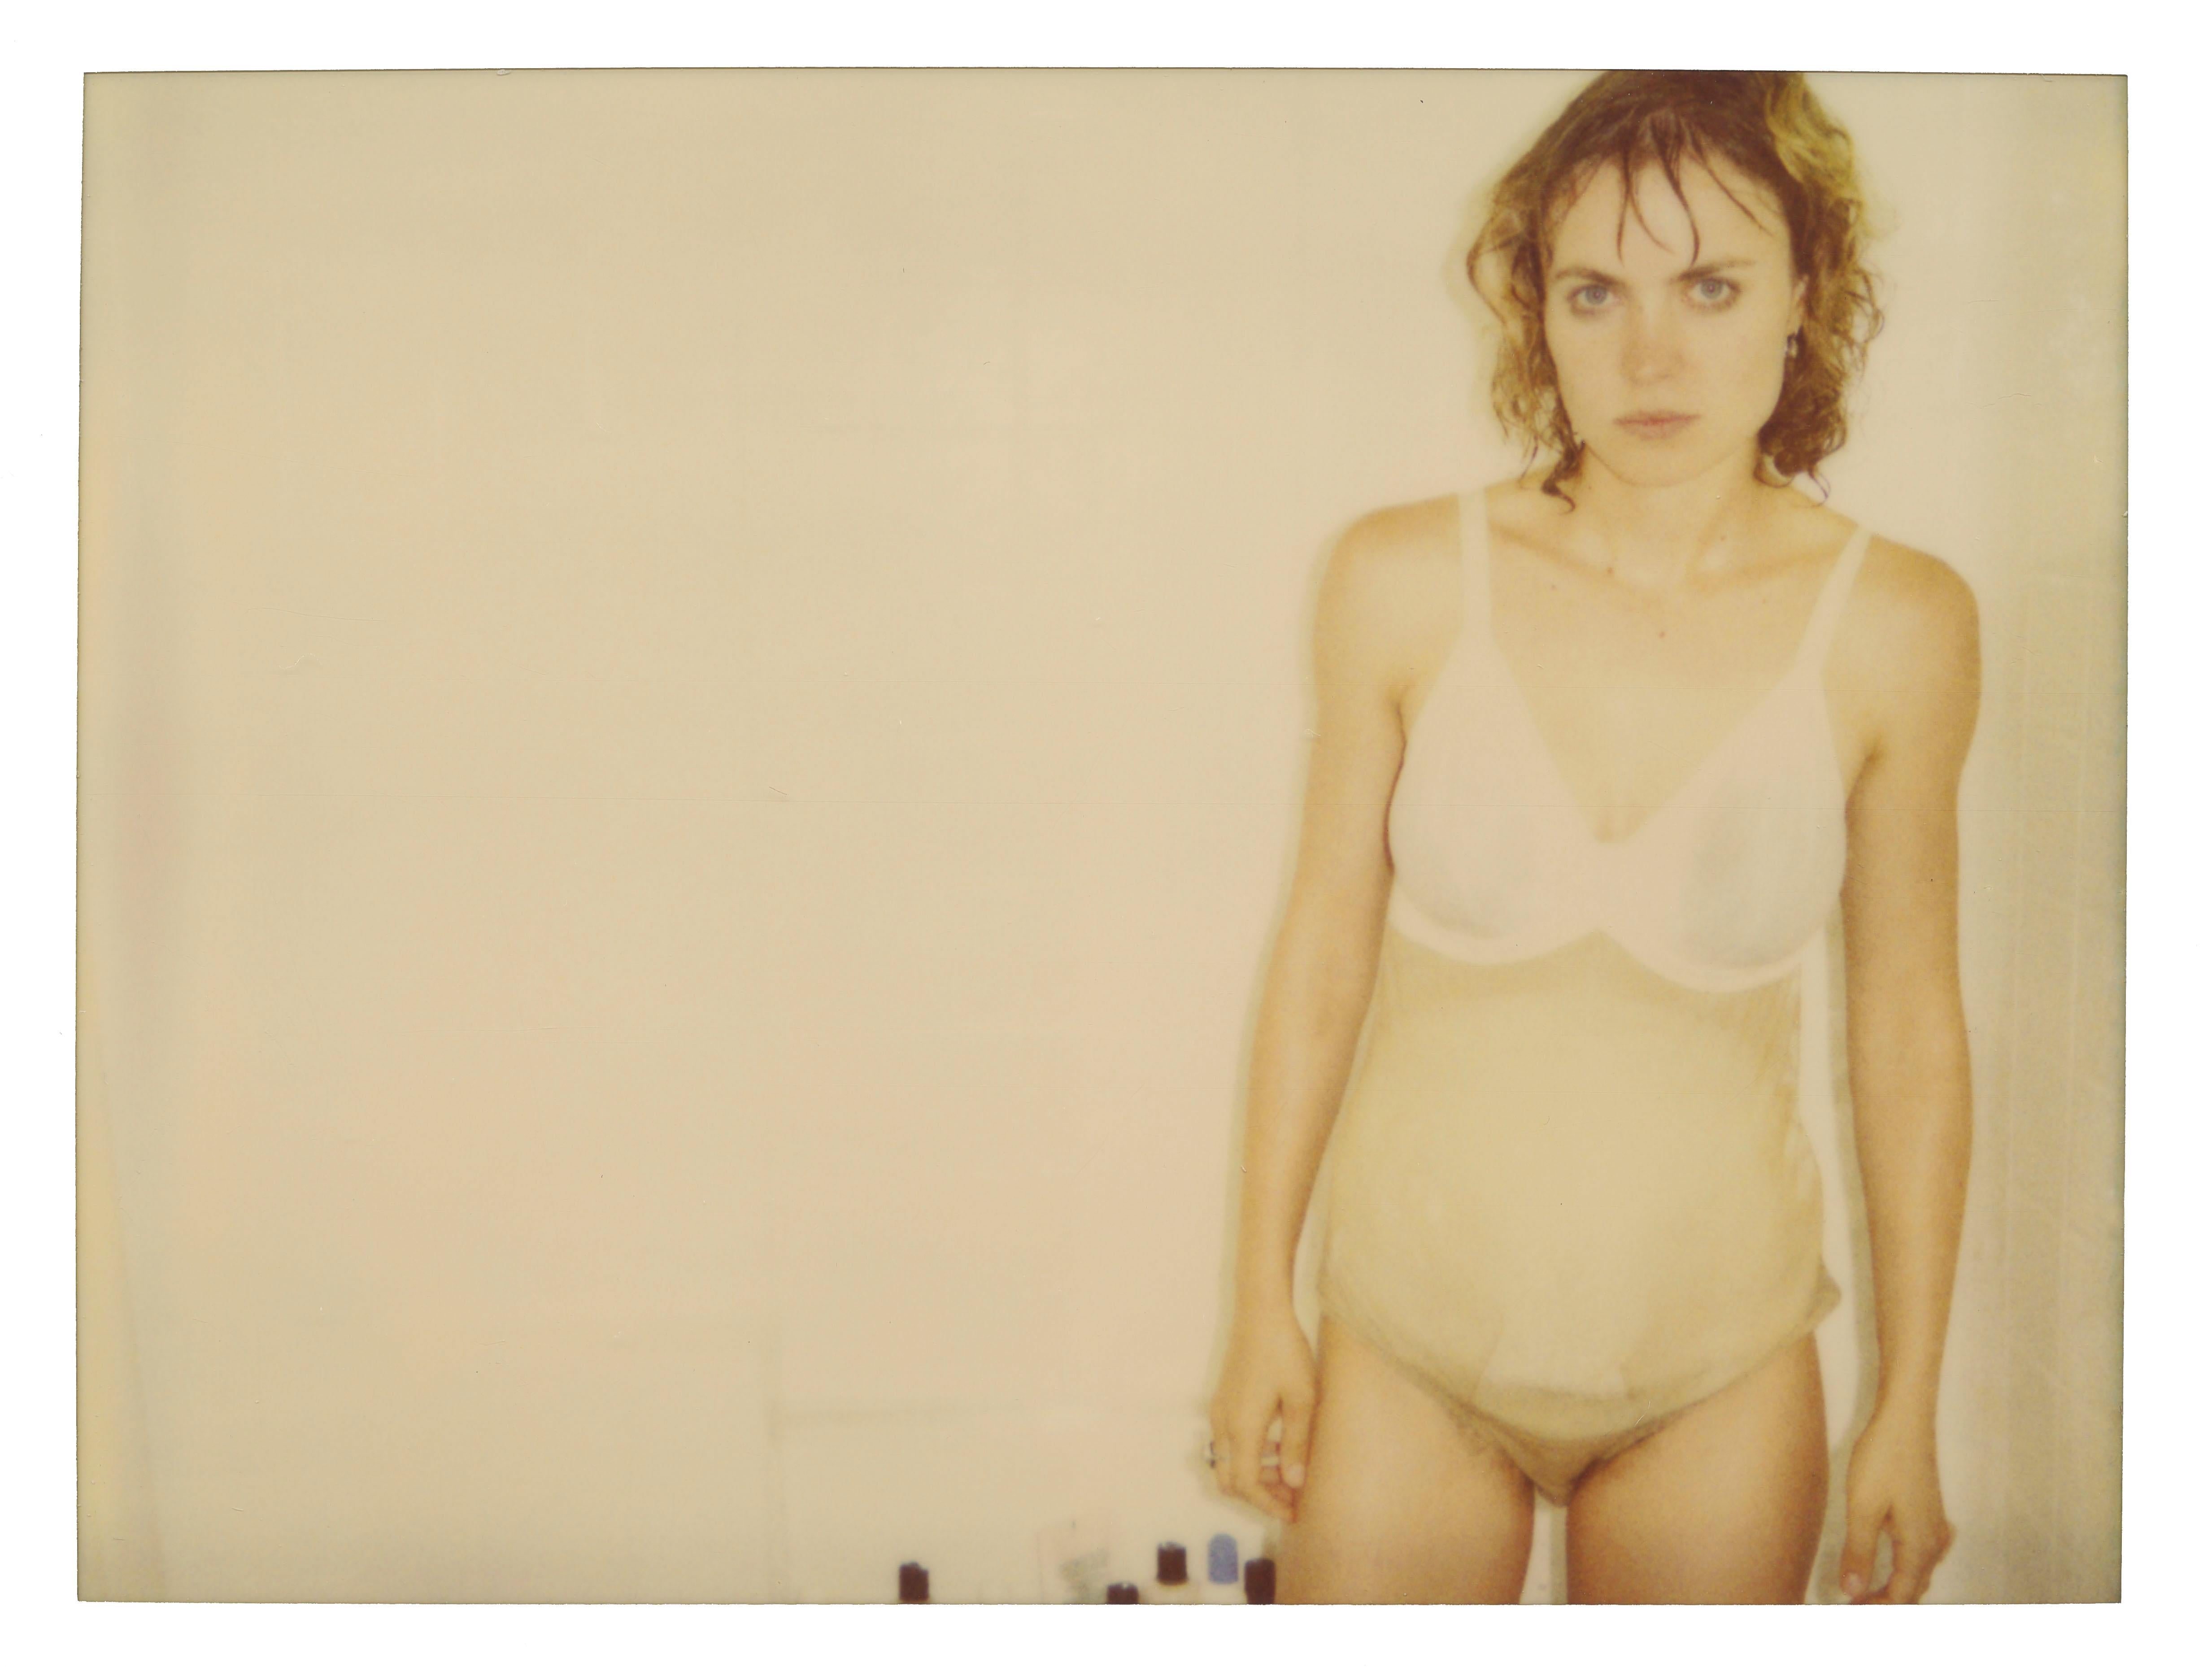 Stefanie Schneider Portrait Photograph - You see Me - Radha Mitchell, Contemporary, Polaroid, Analog, Color, Photography